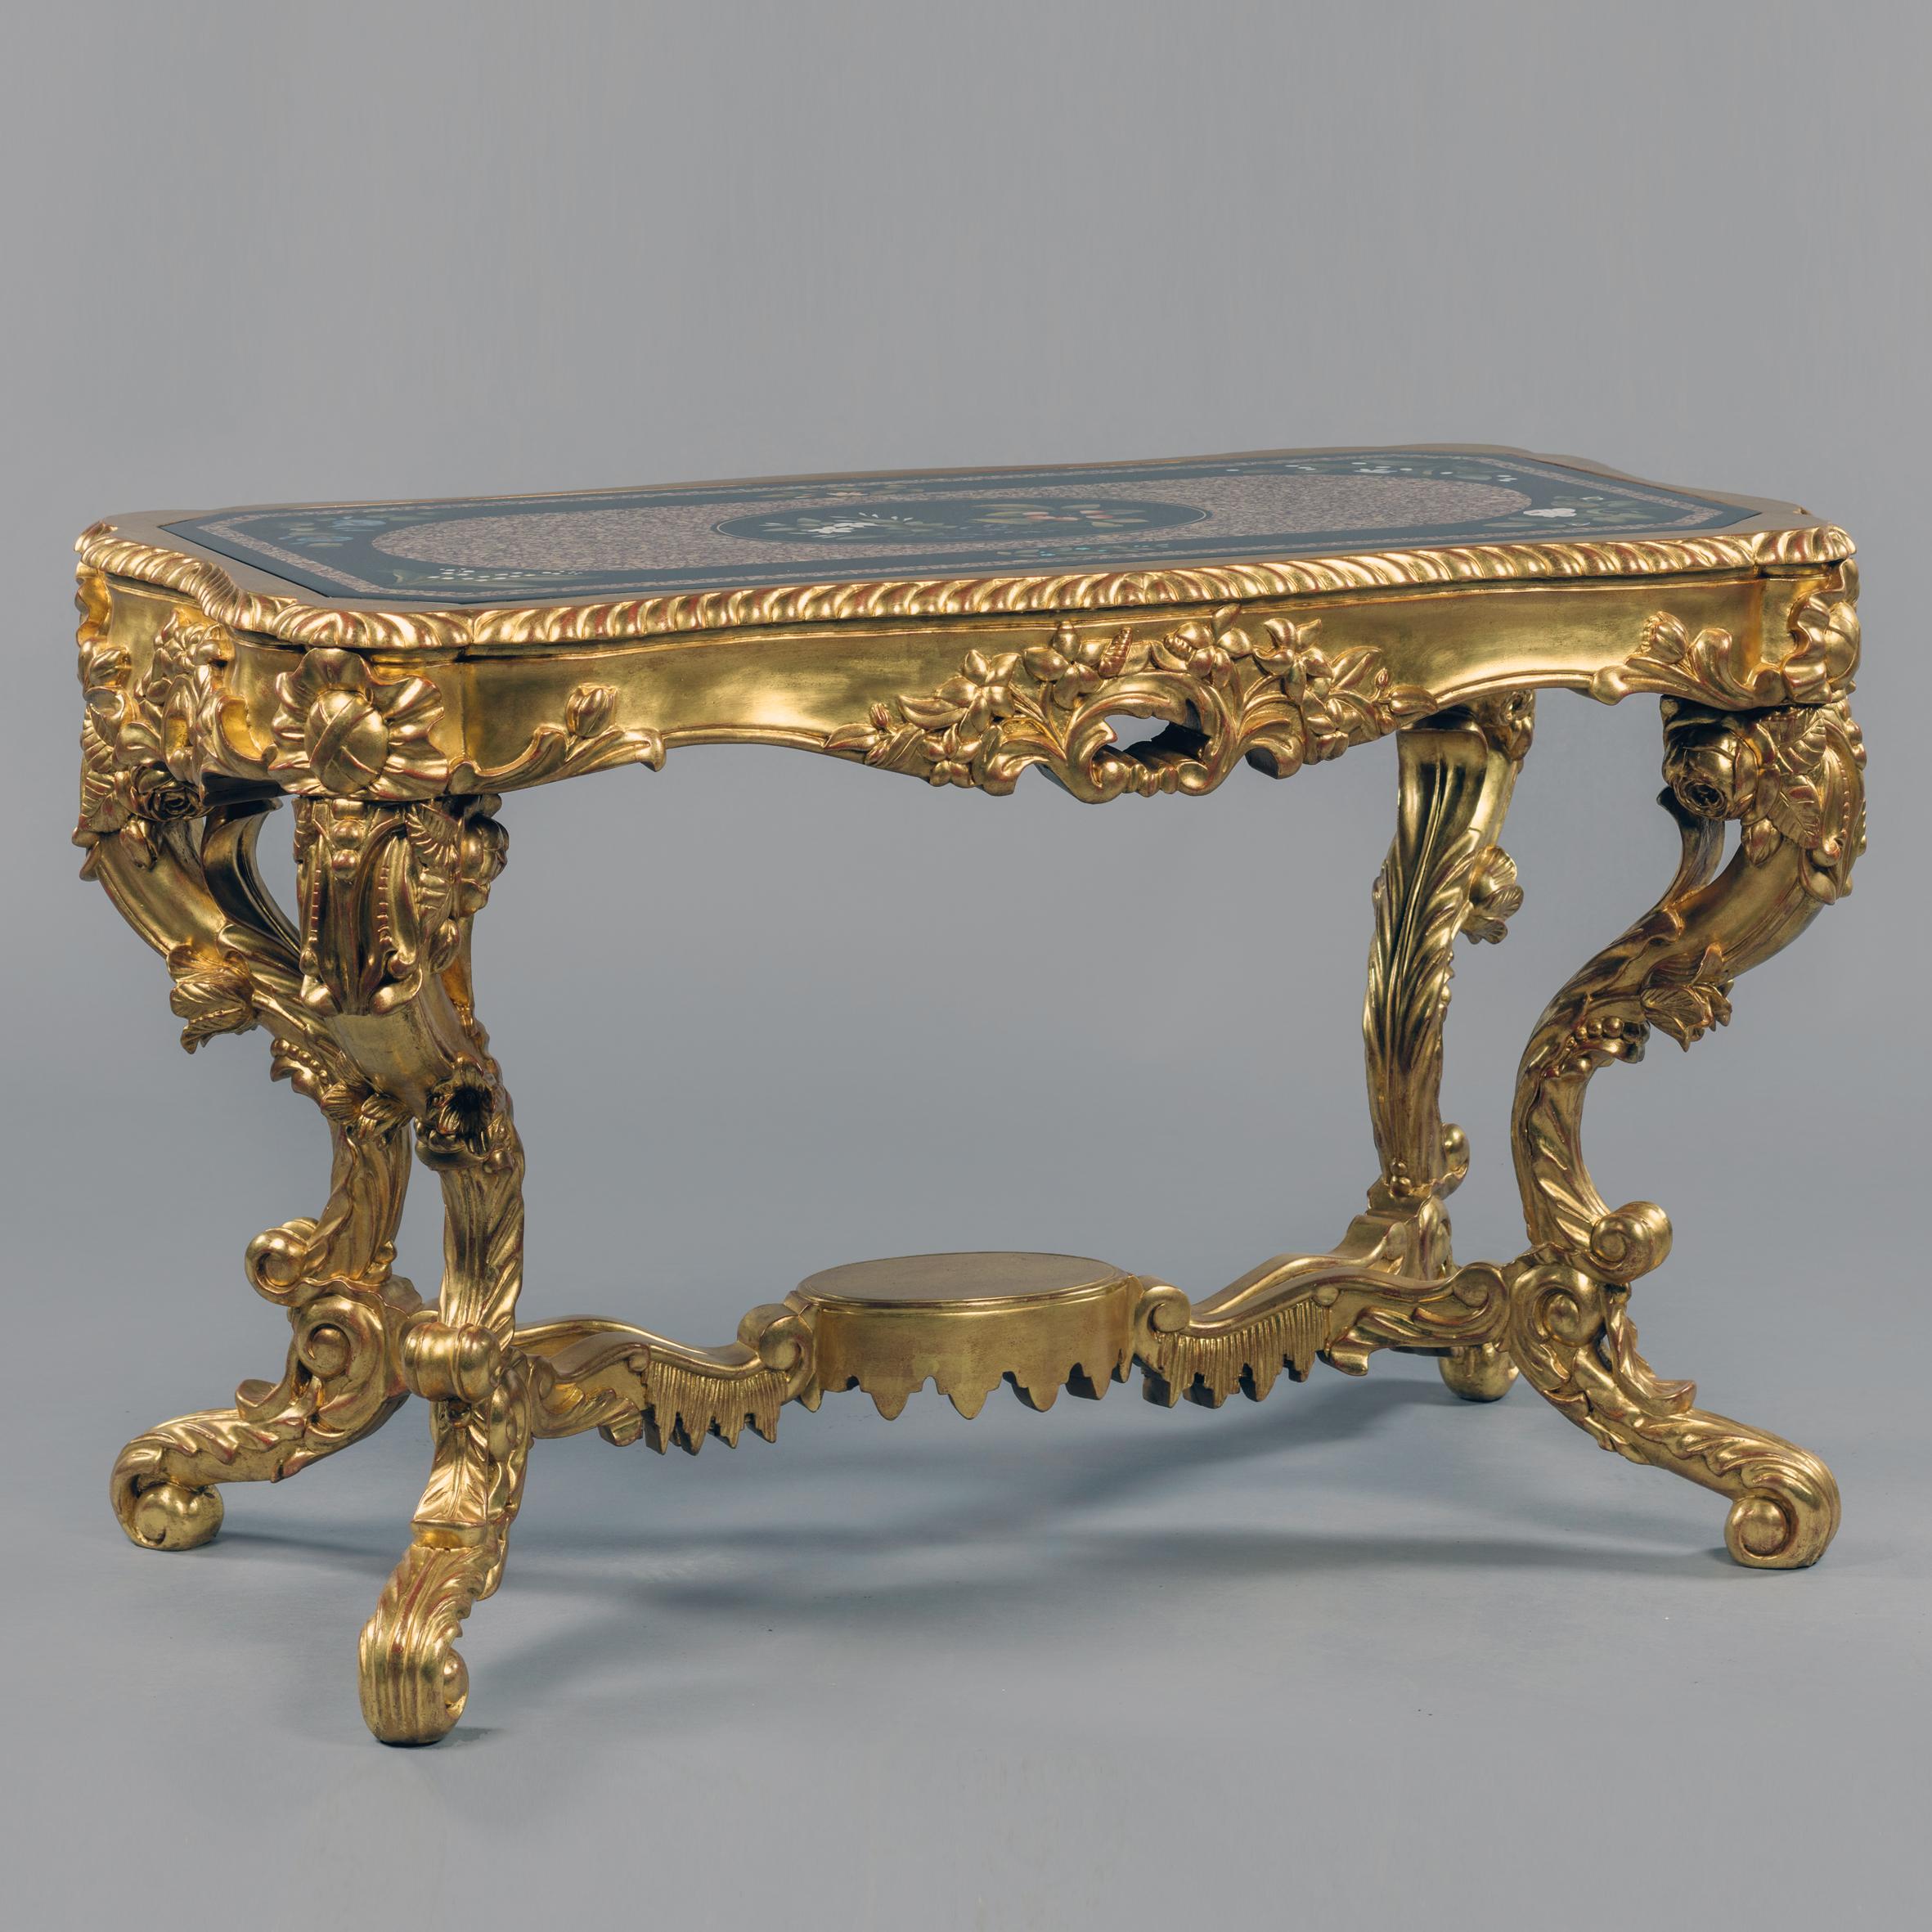 Italian Giltwood Low Centre Table With A Pietre Dure Inlaid Marble Top For Sale